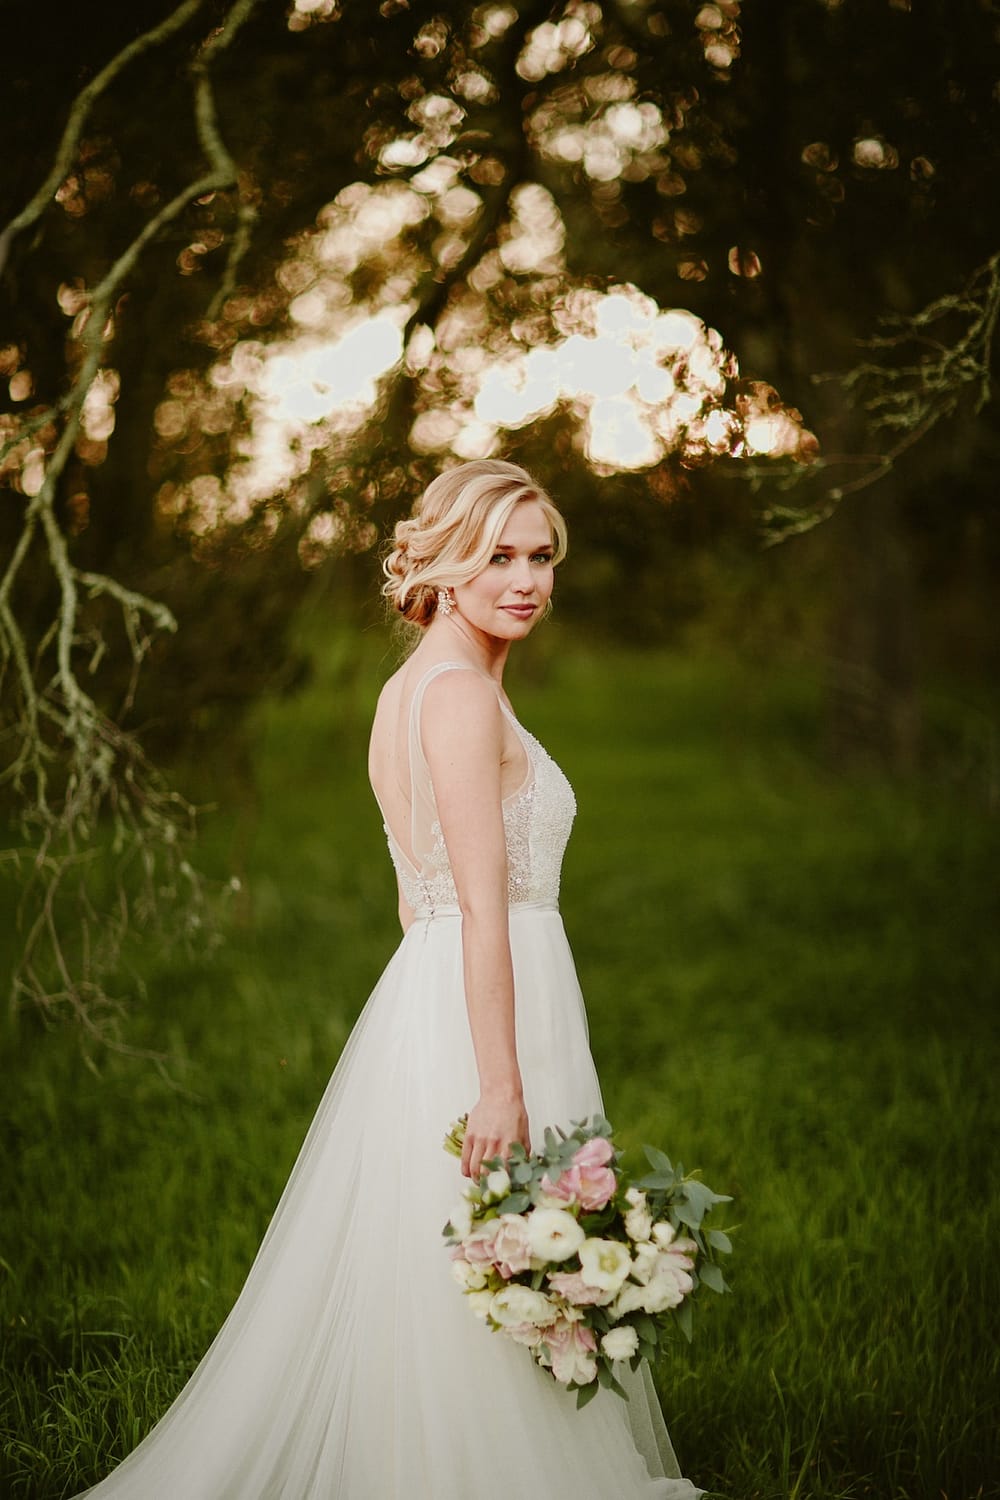 Wedding Dress Sample Sale Off the Rack Bridal gown